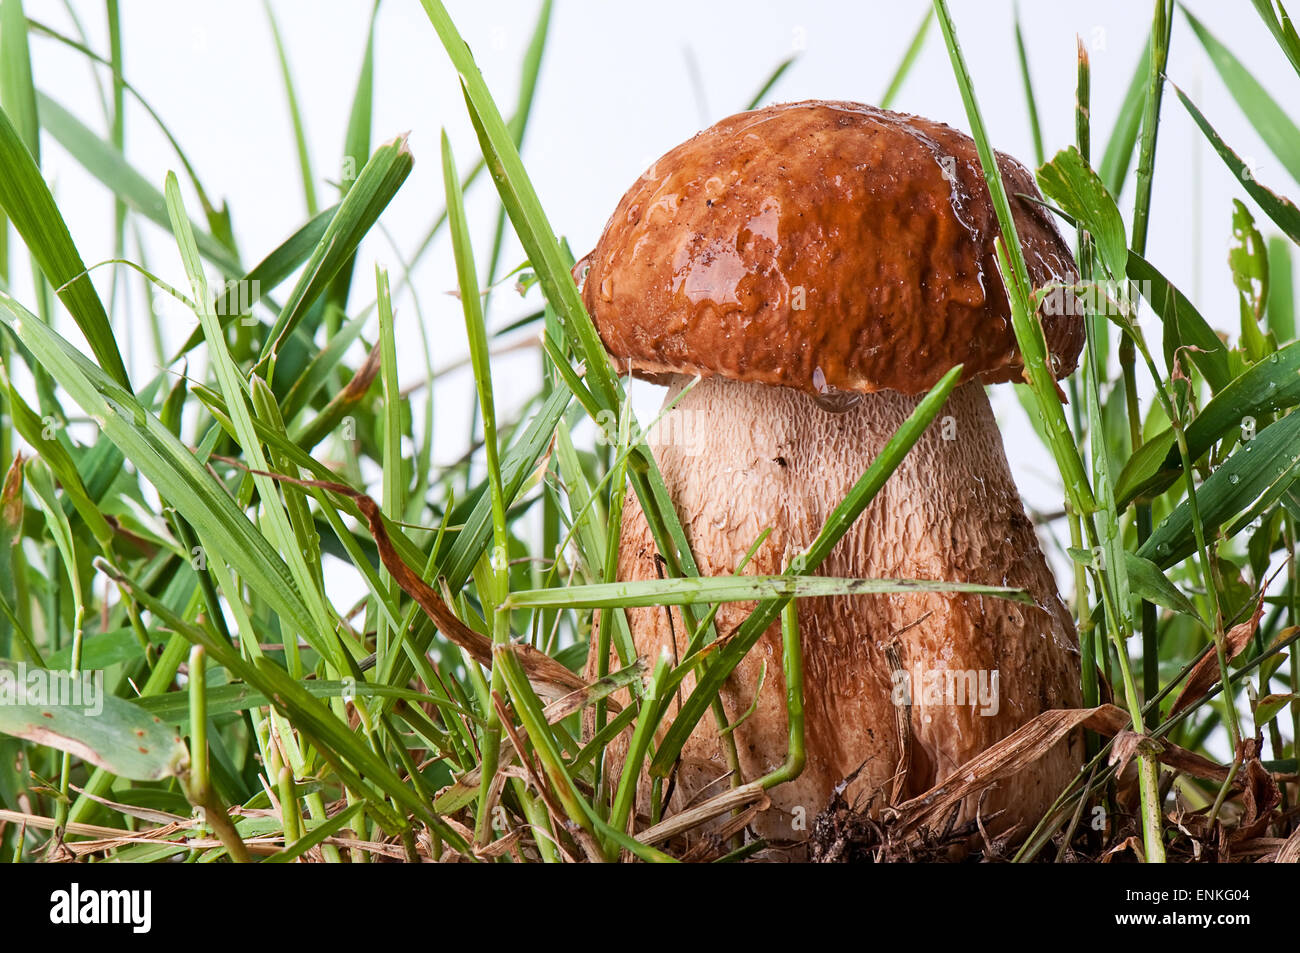 ceps. White mushroom in the green grass on white background Stock Photo